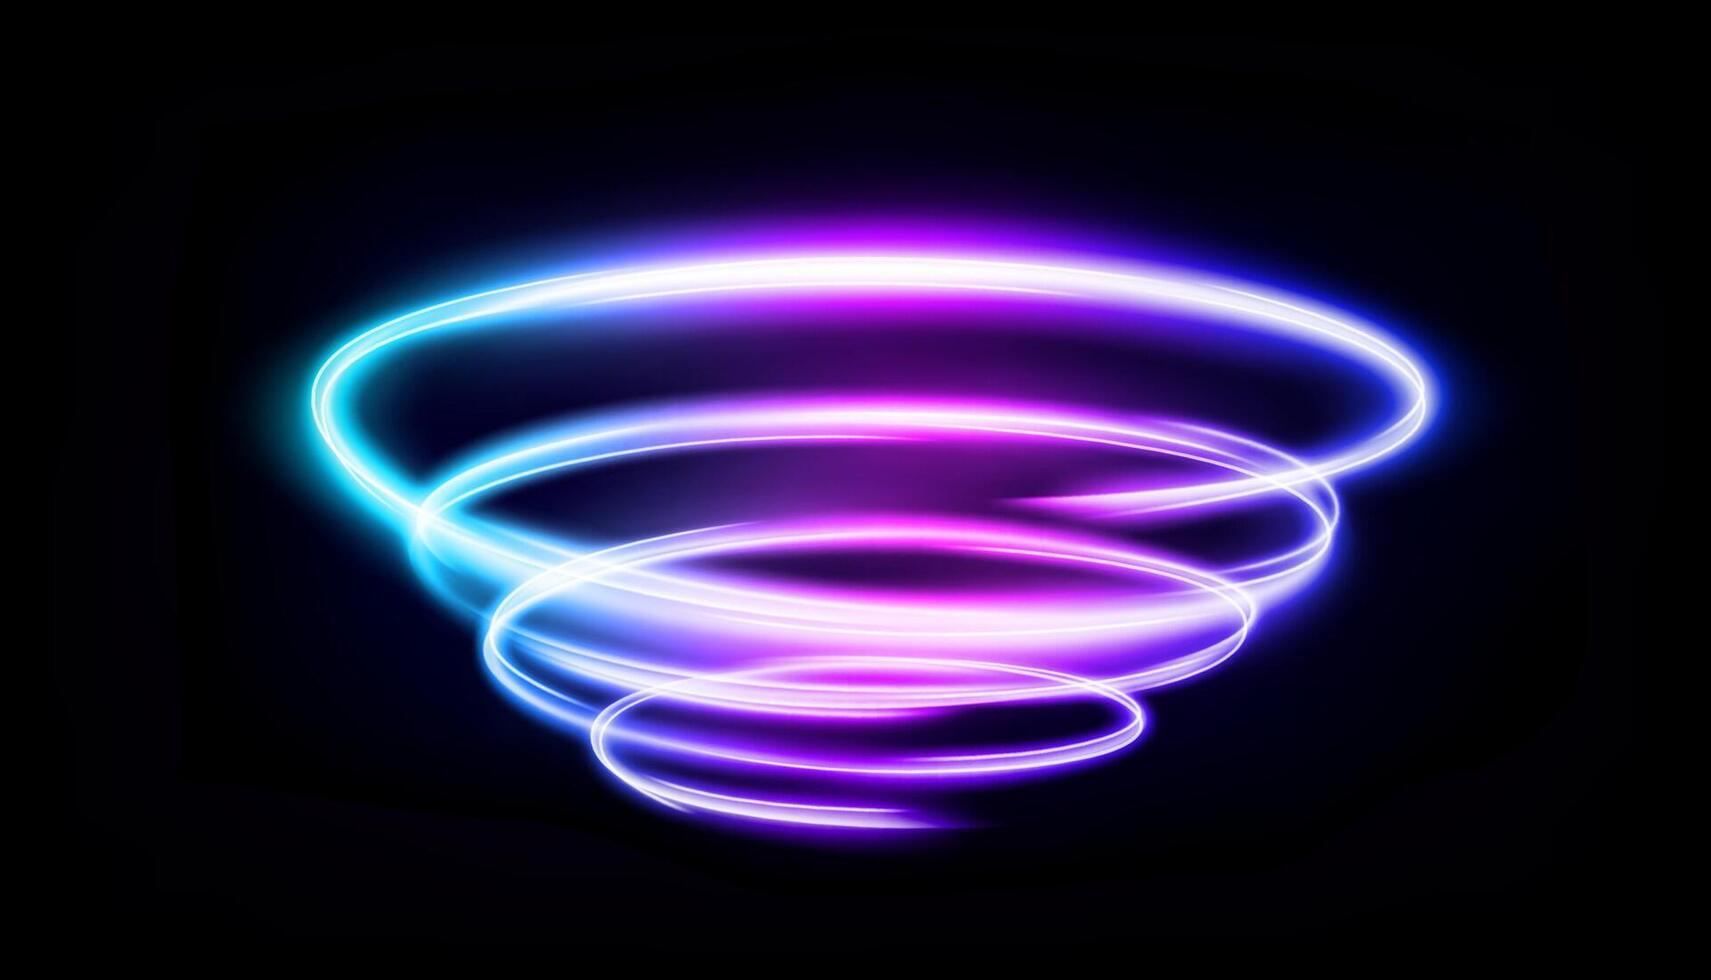 Abstract Multicolor Vortex Line of Light, Isolated on Dark Background, Vector Illustration